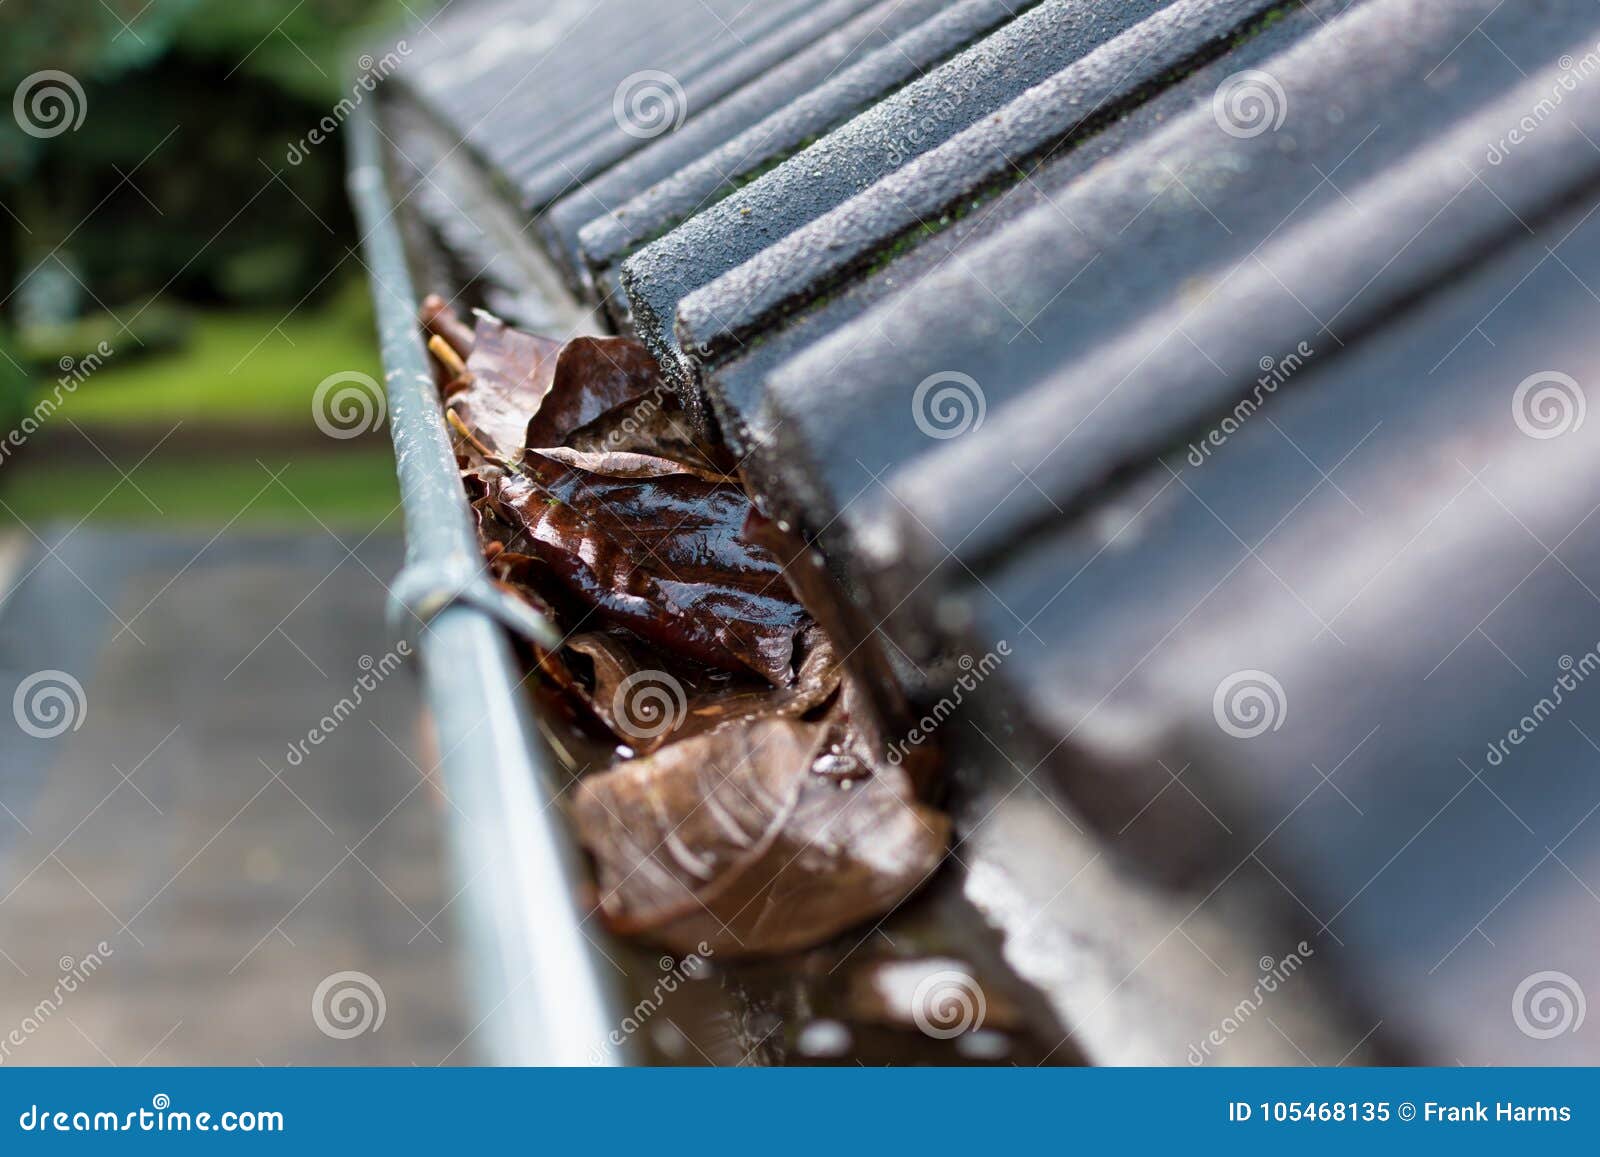 gutter blocked by leaves